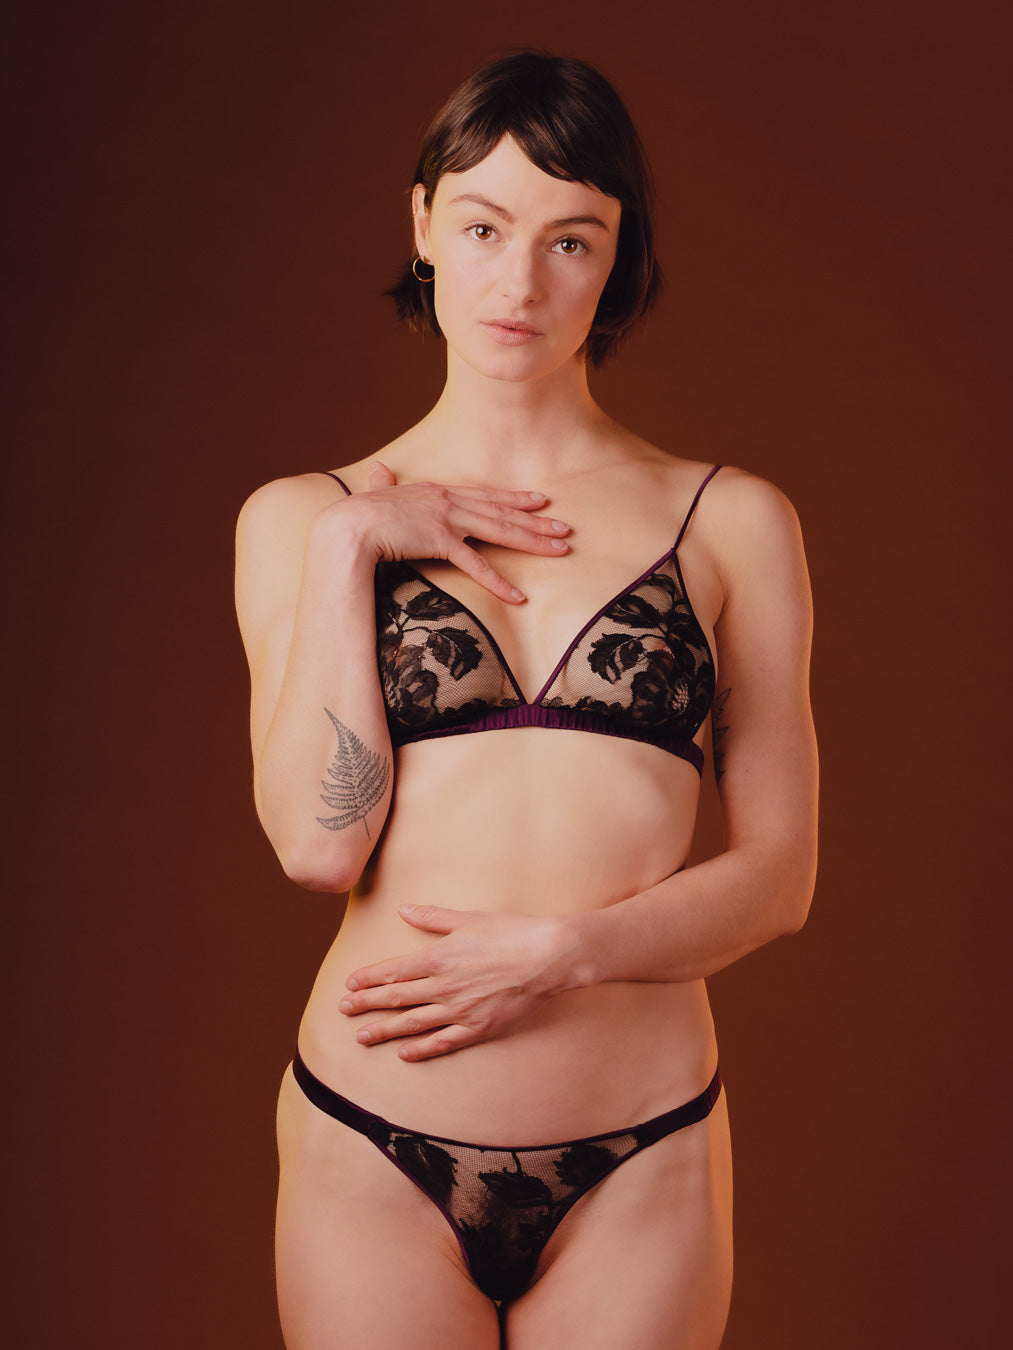 Nocturne Silk & Lace Thong - Made To Order